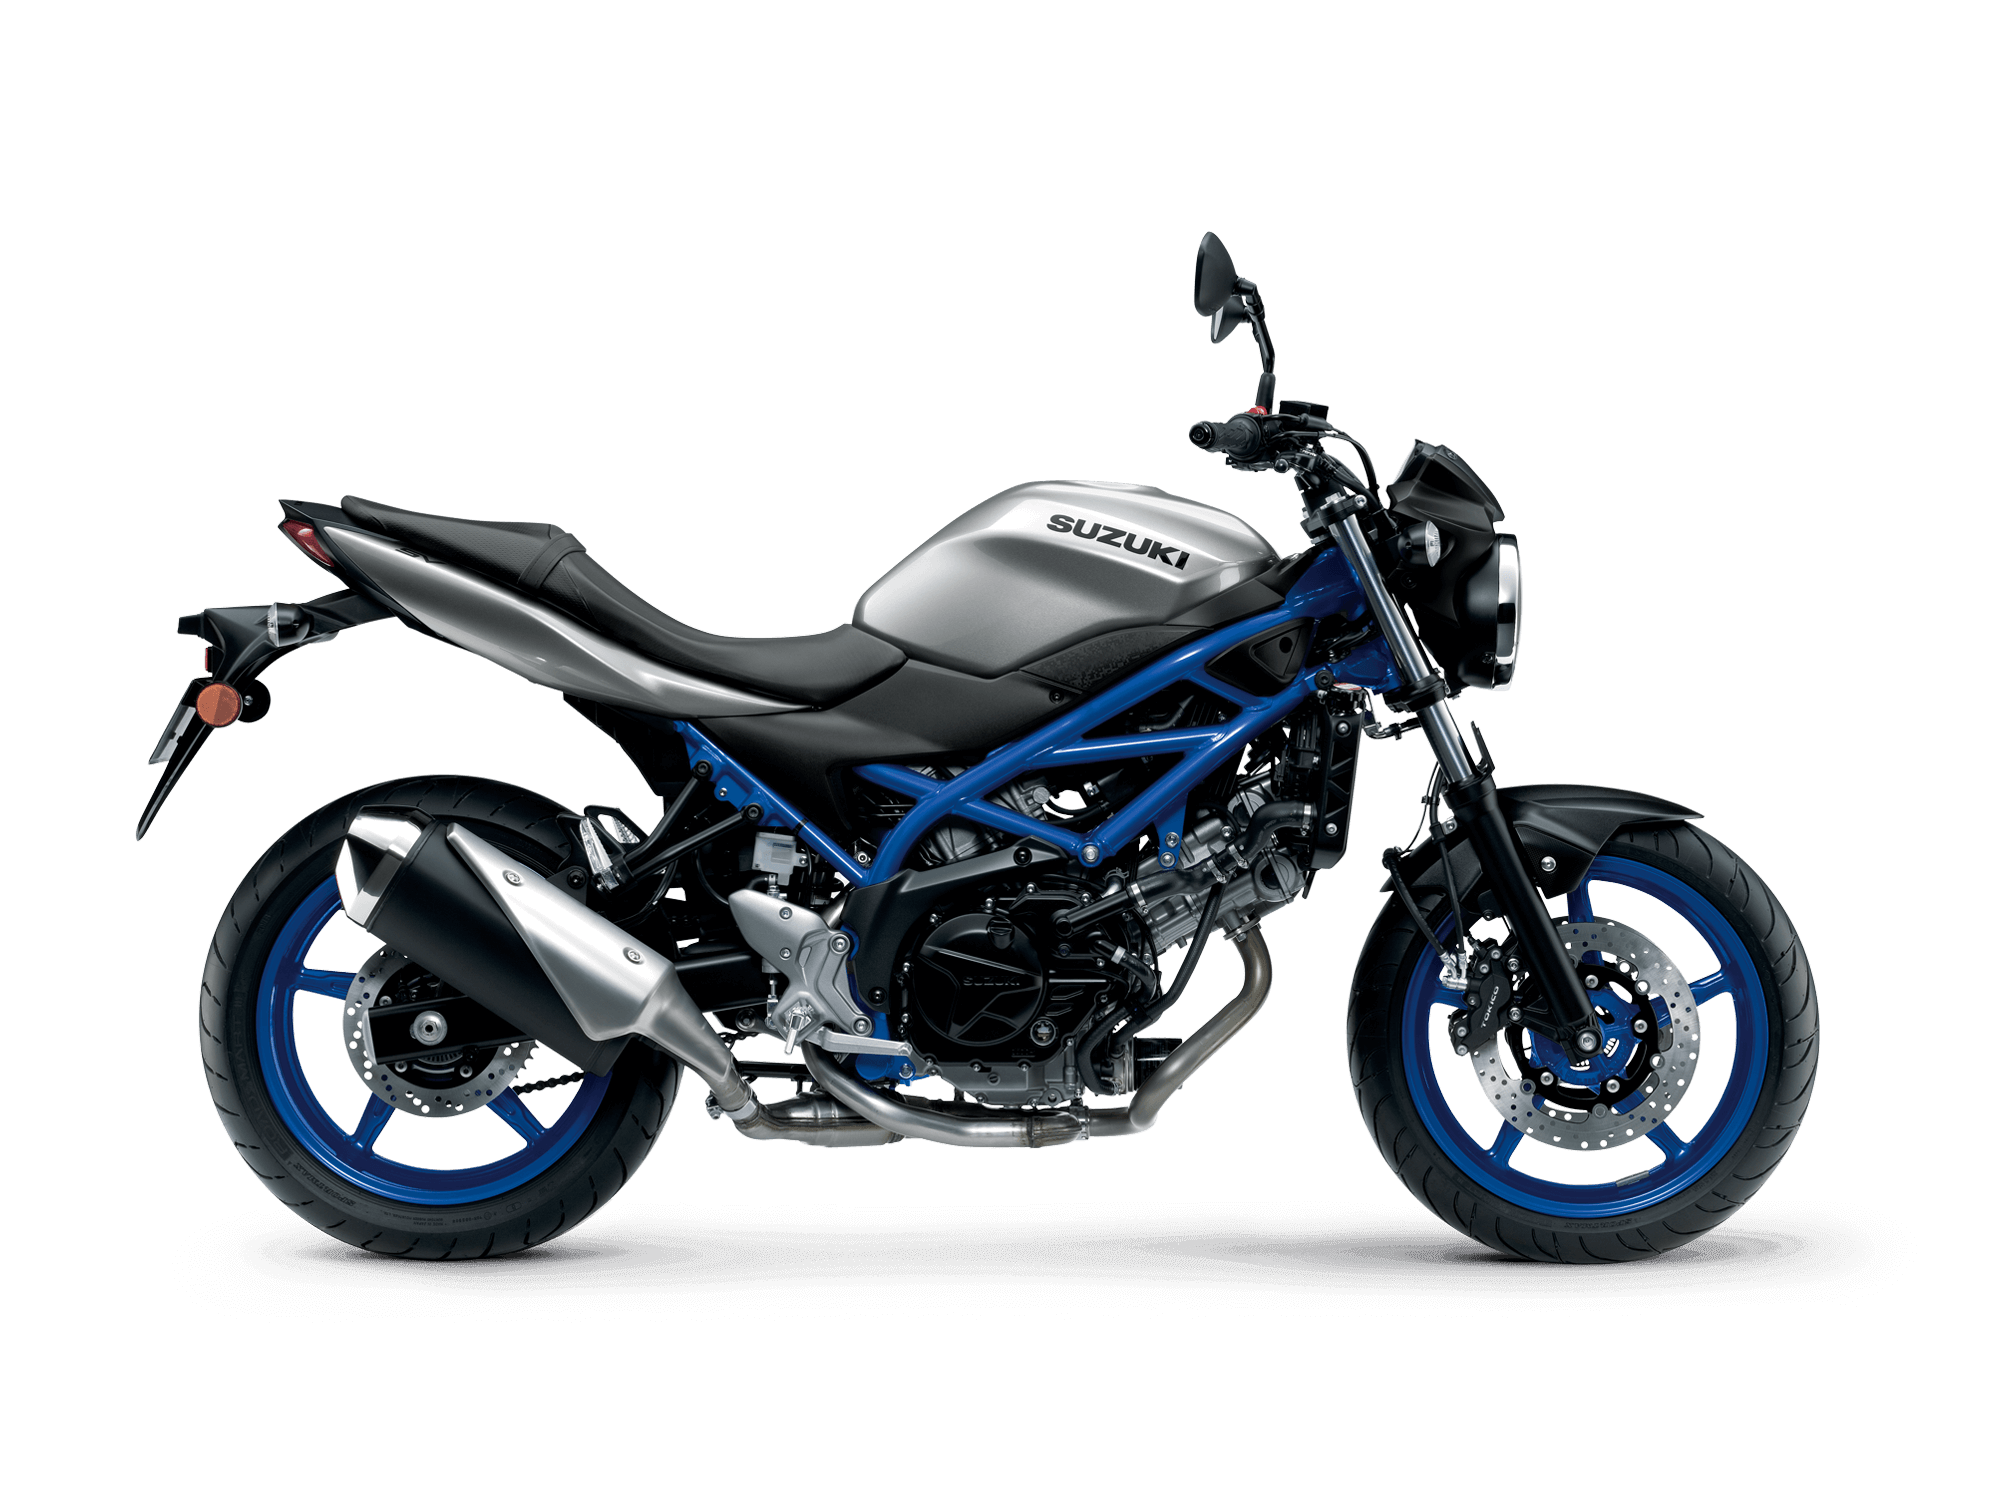 New Colours for 2020 Suzuki SV650 - Motorcycle news, Motorcycle reviews ...